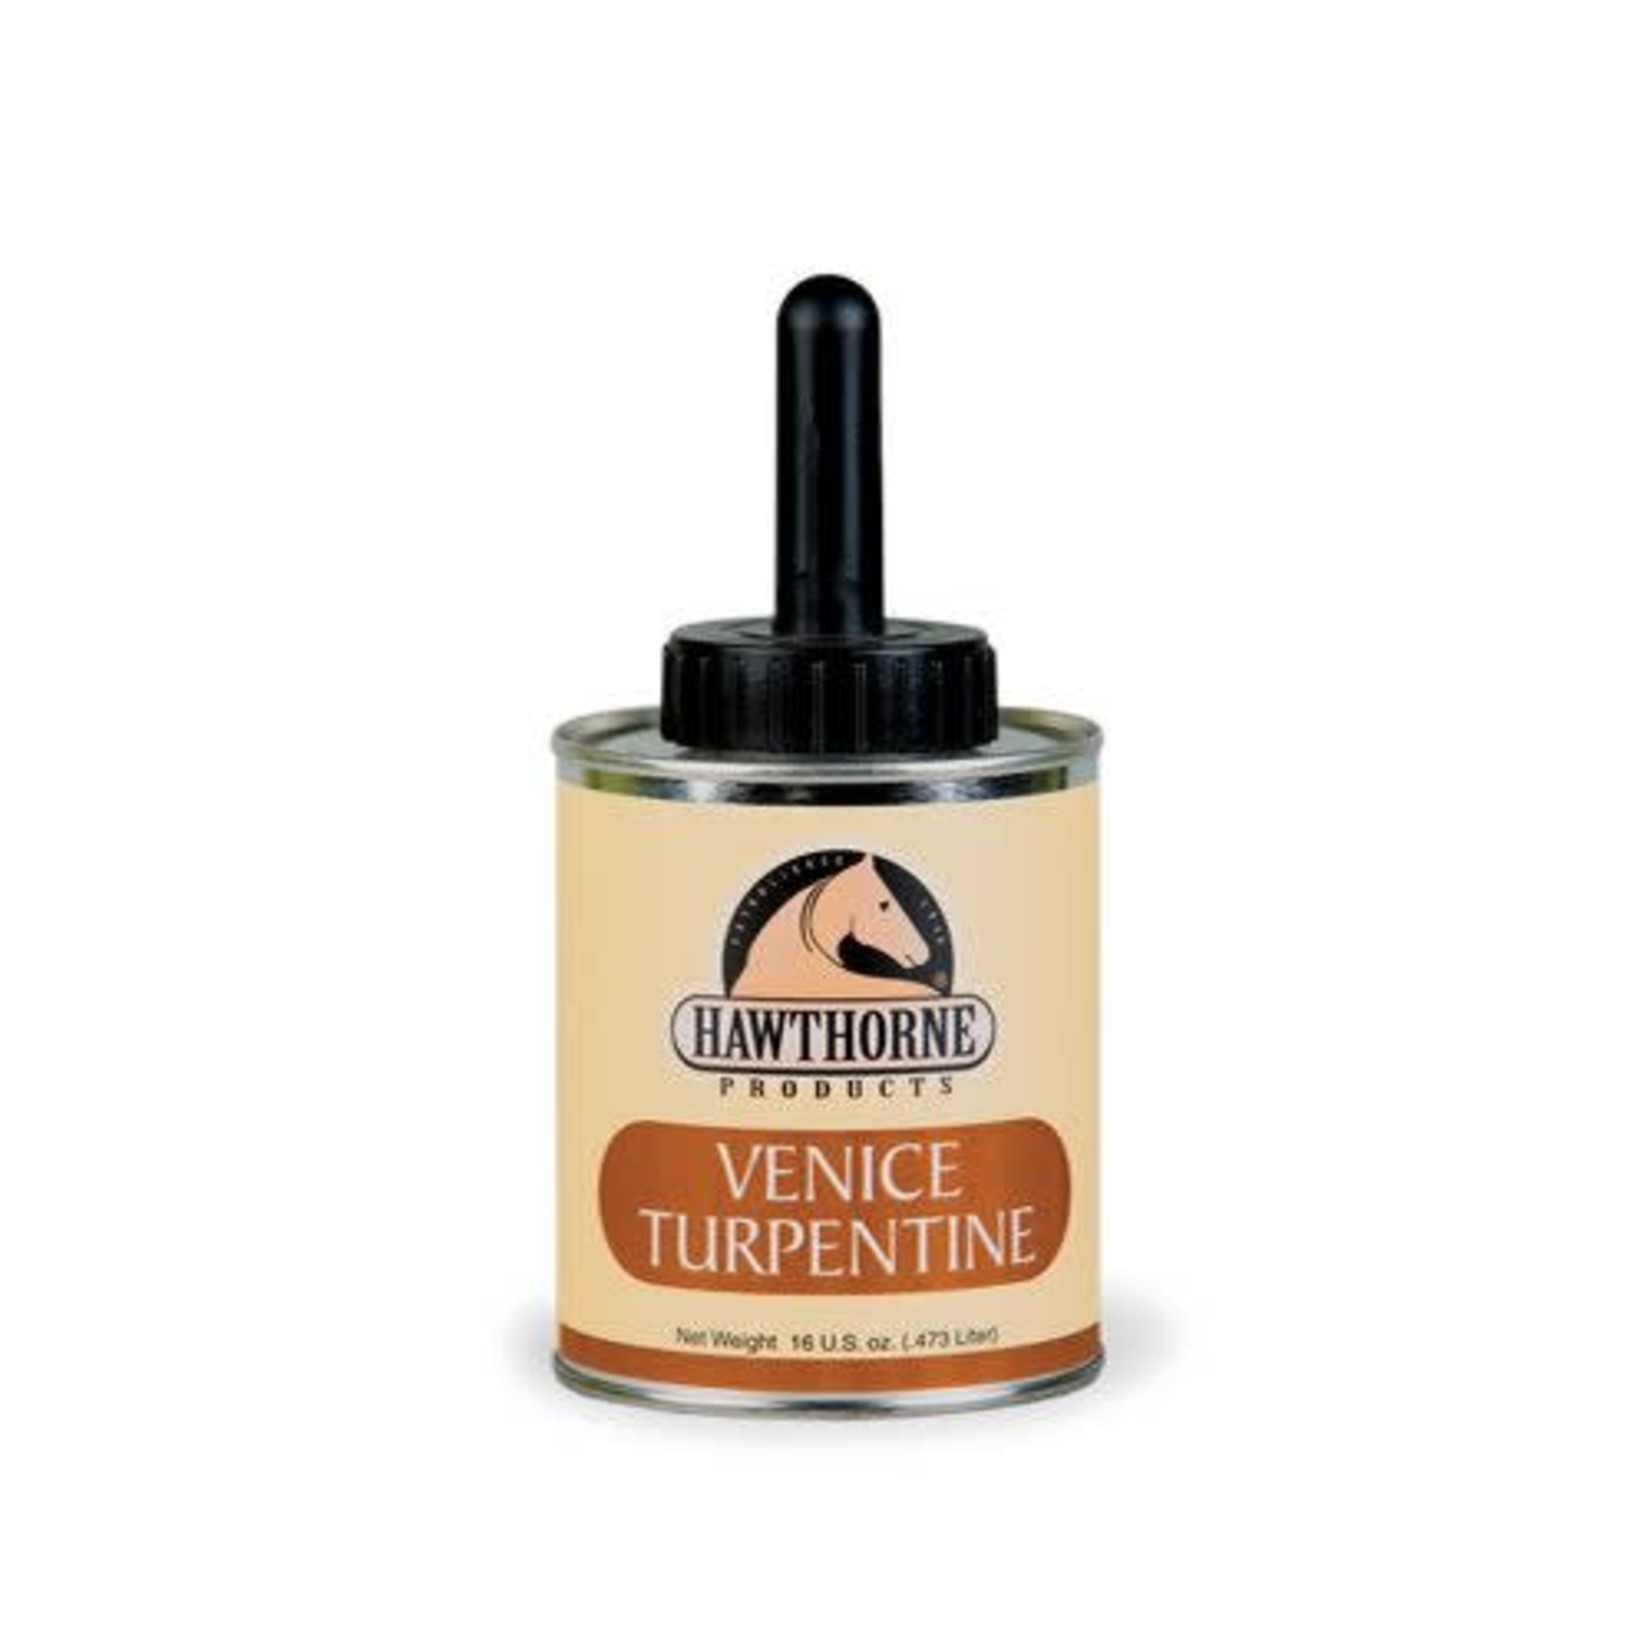 Hawthorne Products Venice Turpentine